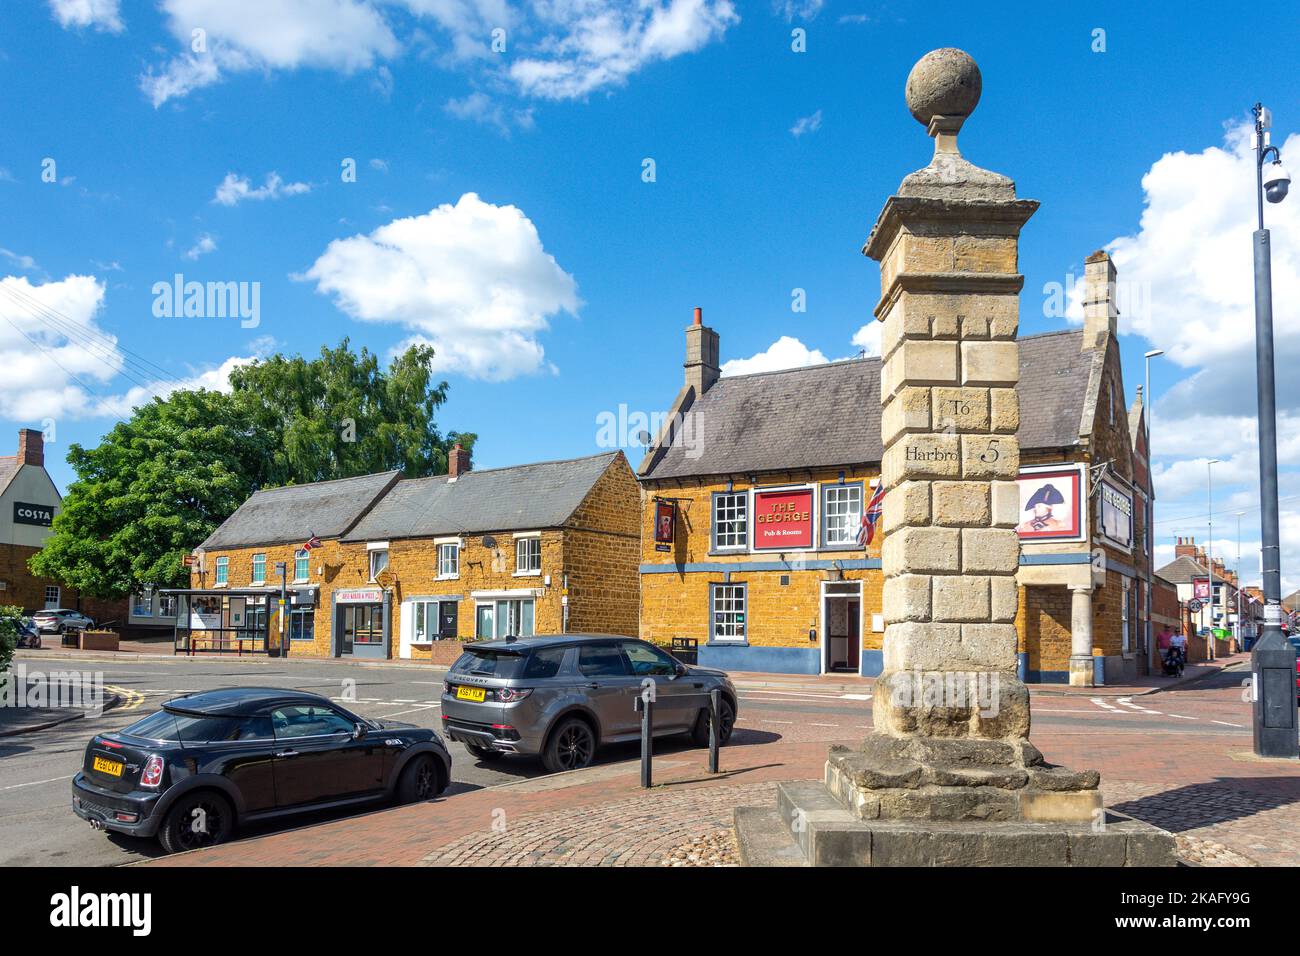 The Ancient Cross, High Street, Desborough, Northamptonshire, Angleterre, Royaume-Uni Banque D'Images